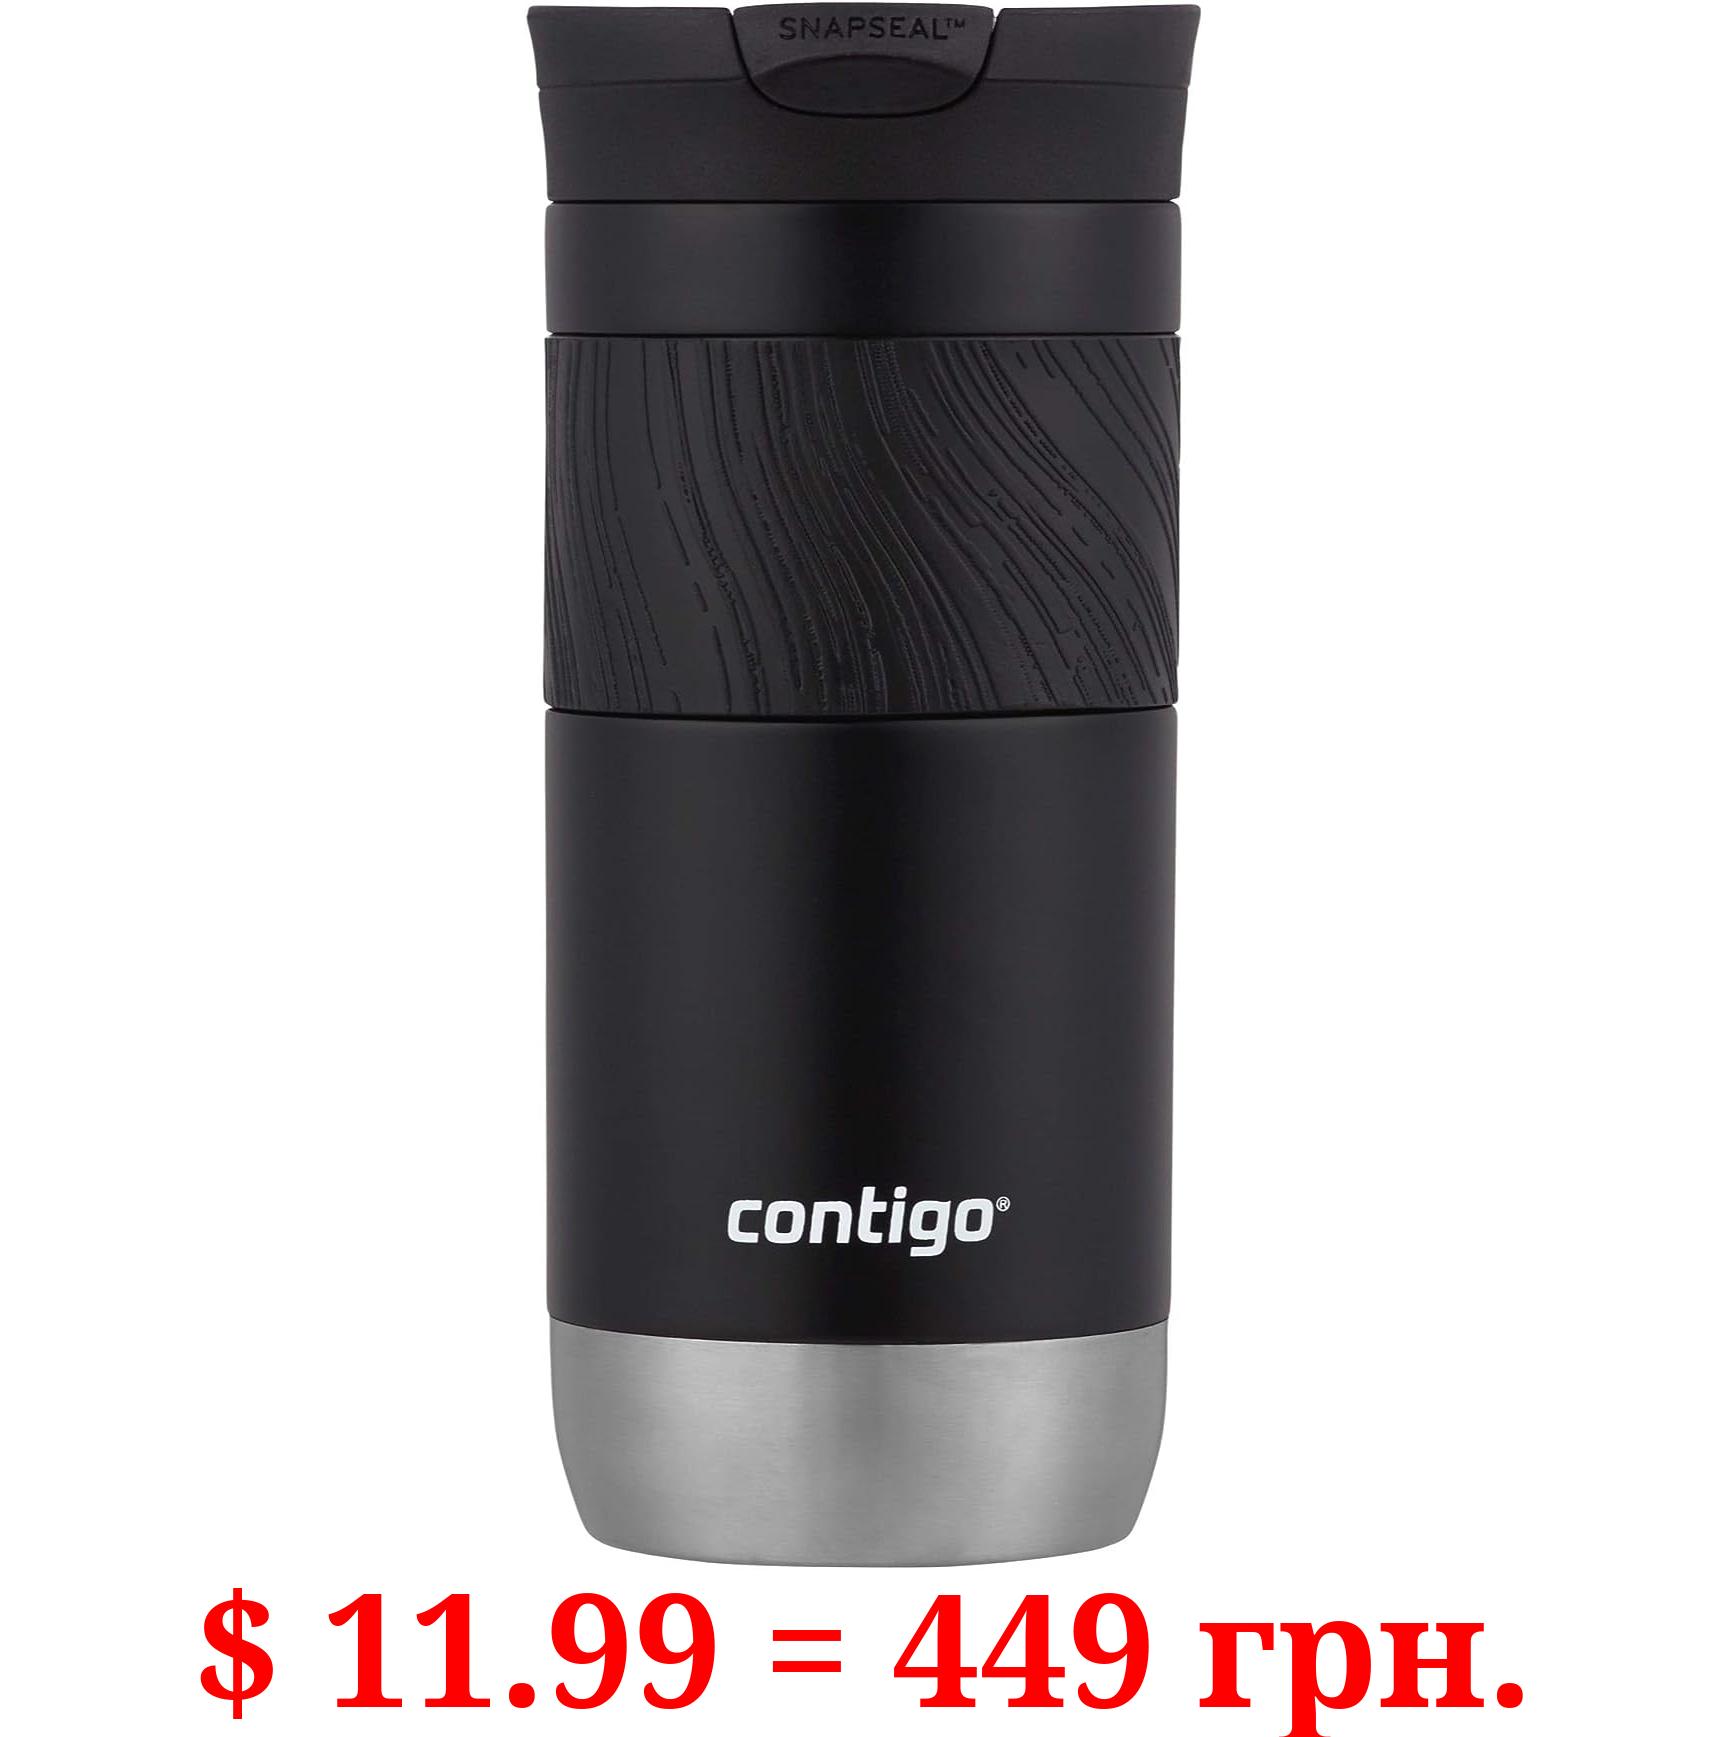 Contigo Byron Vacuum-Insulated Stainless Steel Travel Mug with Leak-Proof Lid, Reusable Coffee Cup or Water Bottle, BPA-Free, Keeps Drinks Hot or Cold for Hours, 16oz, Licorice